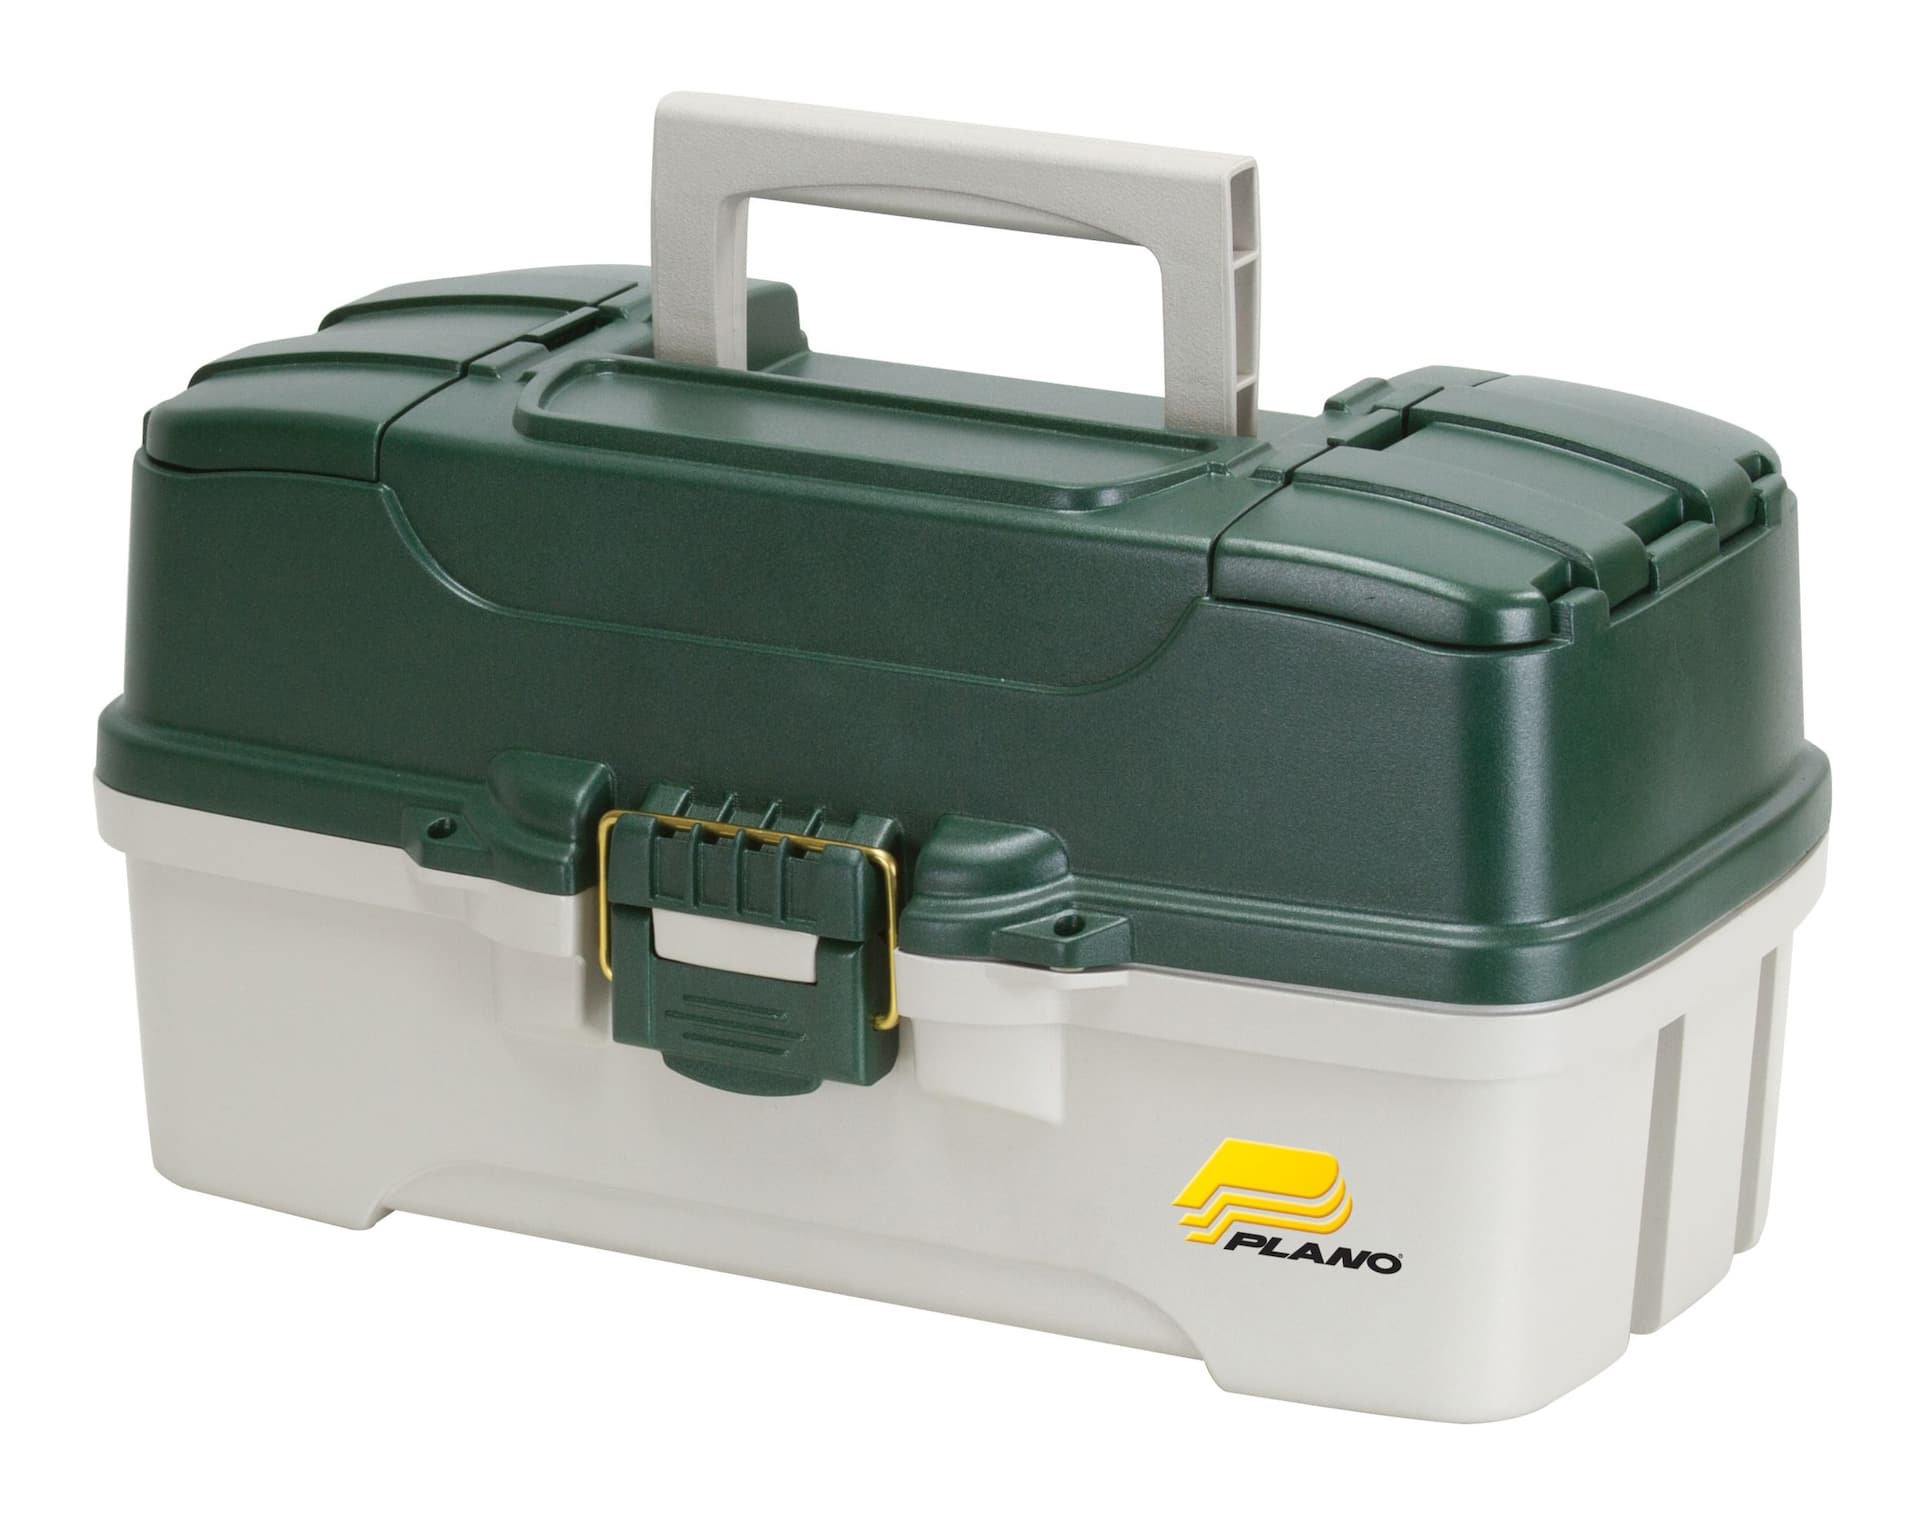 https://media-www.canadiantire.ca/product/playing/fishing/fishing-accessories/0770562/plano-3-tray-tackle-box-63db404c-51dd-4452-bcf2-d8ad6cbc5ed7-jpgrendition.jpg